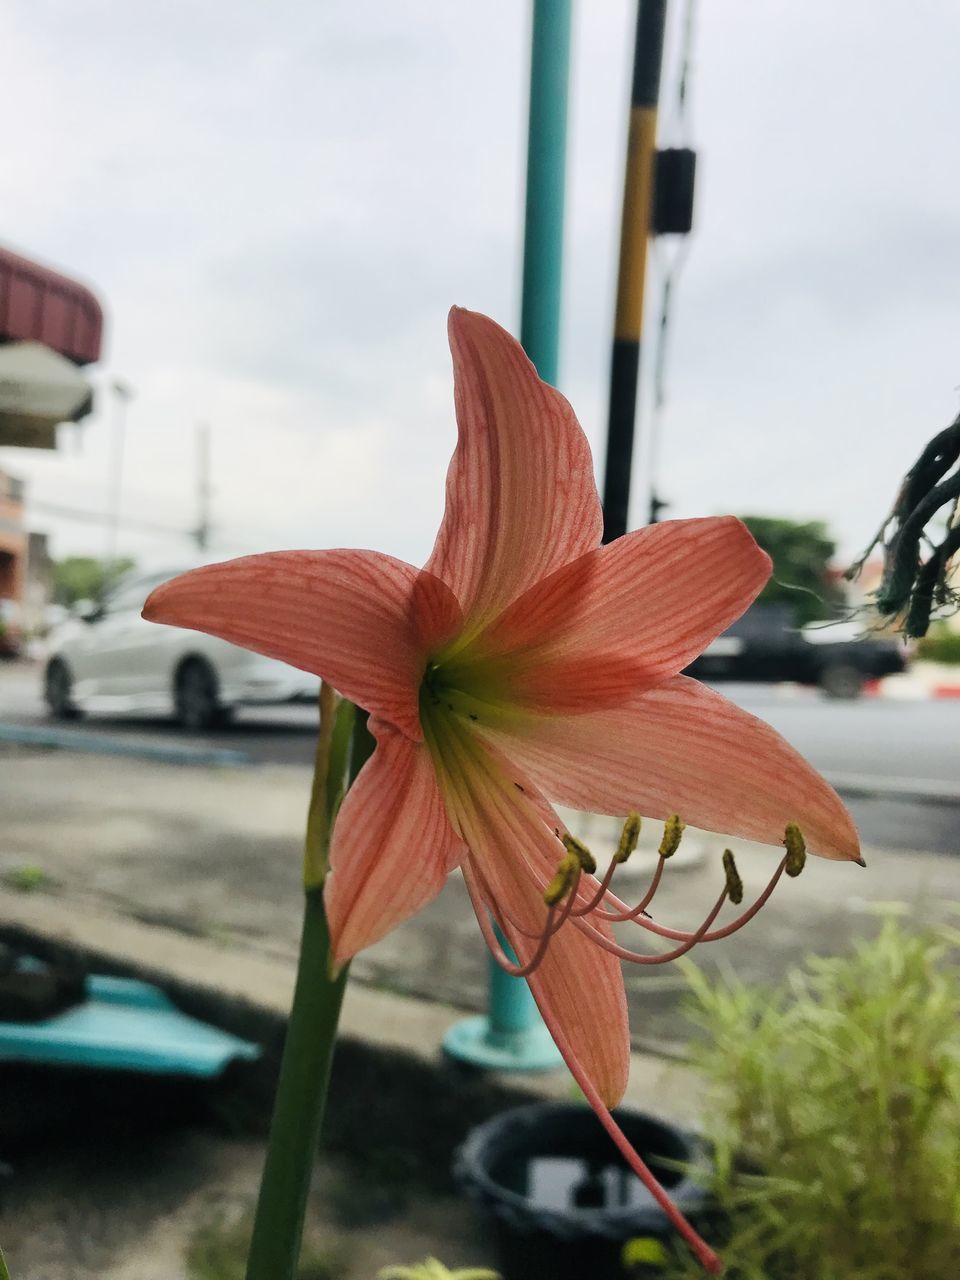 flower, plant, flowering plant, freshness, close-up, nature, beauty in nature, lily, focus on foreground, fragility, petal, day, growth, flower head, inflorescence, no people, outdoors, leaf, wheel, car, pollen